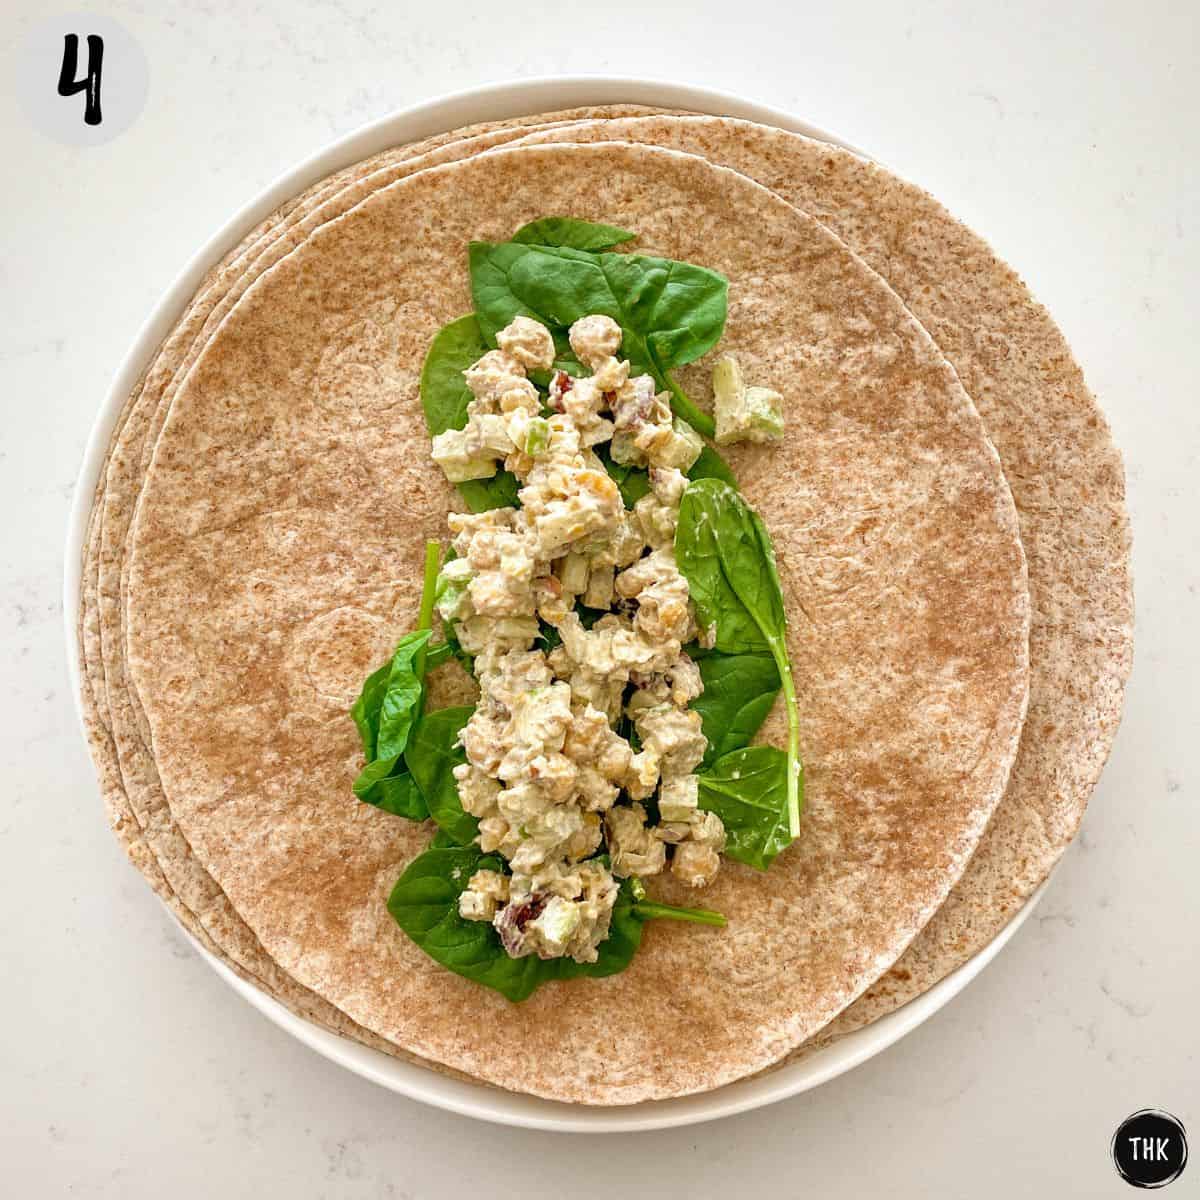 Tortilla wrap open with spinach and chickpea salad in the middle.